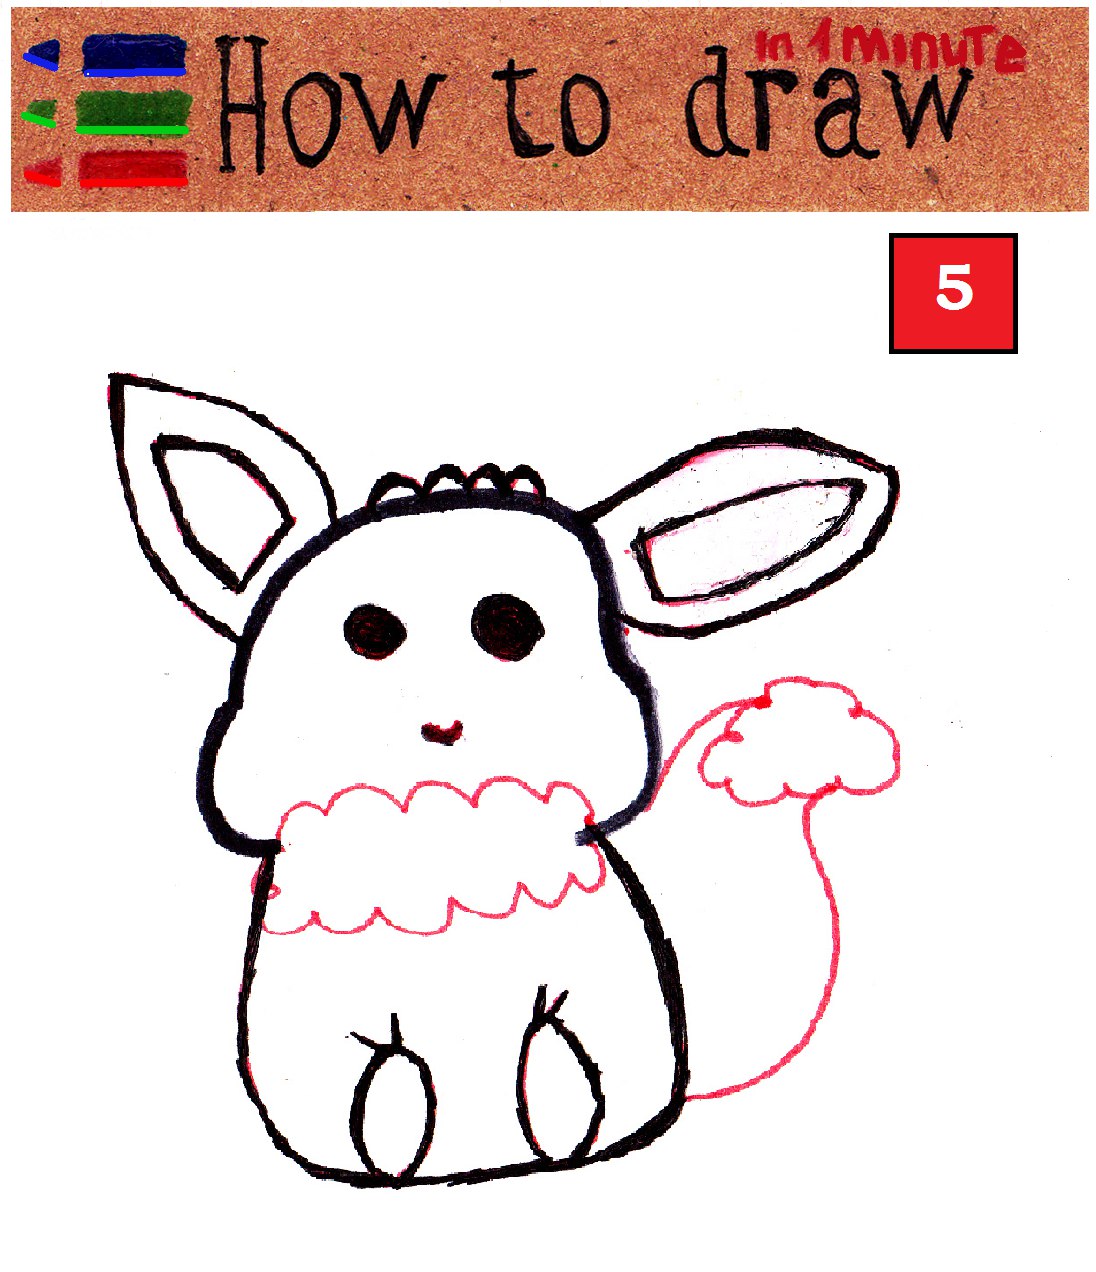 How to draw Pokemon Eevee step by step